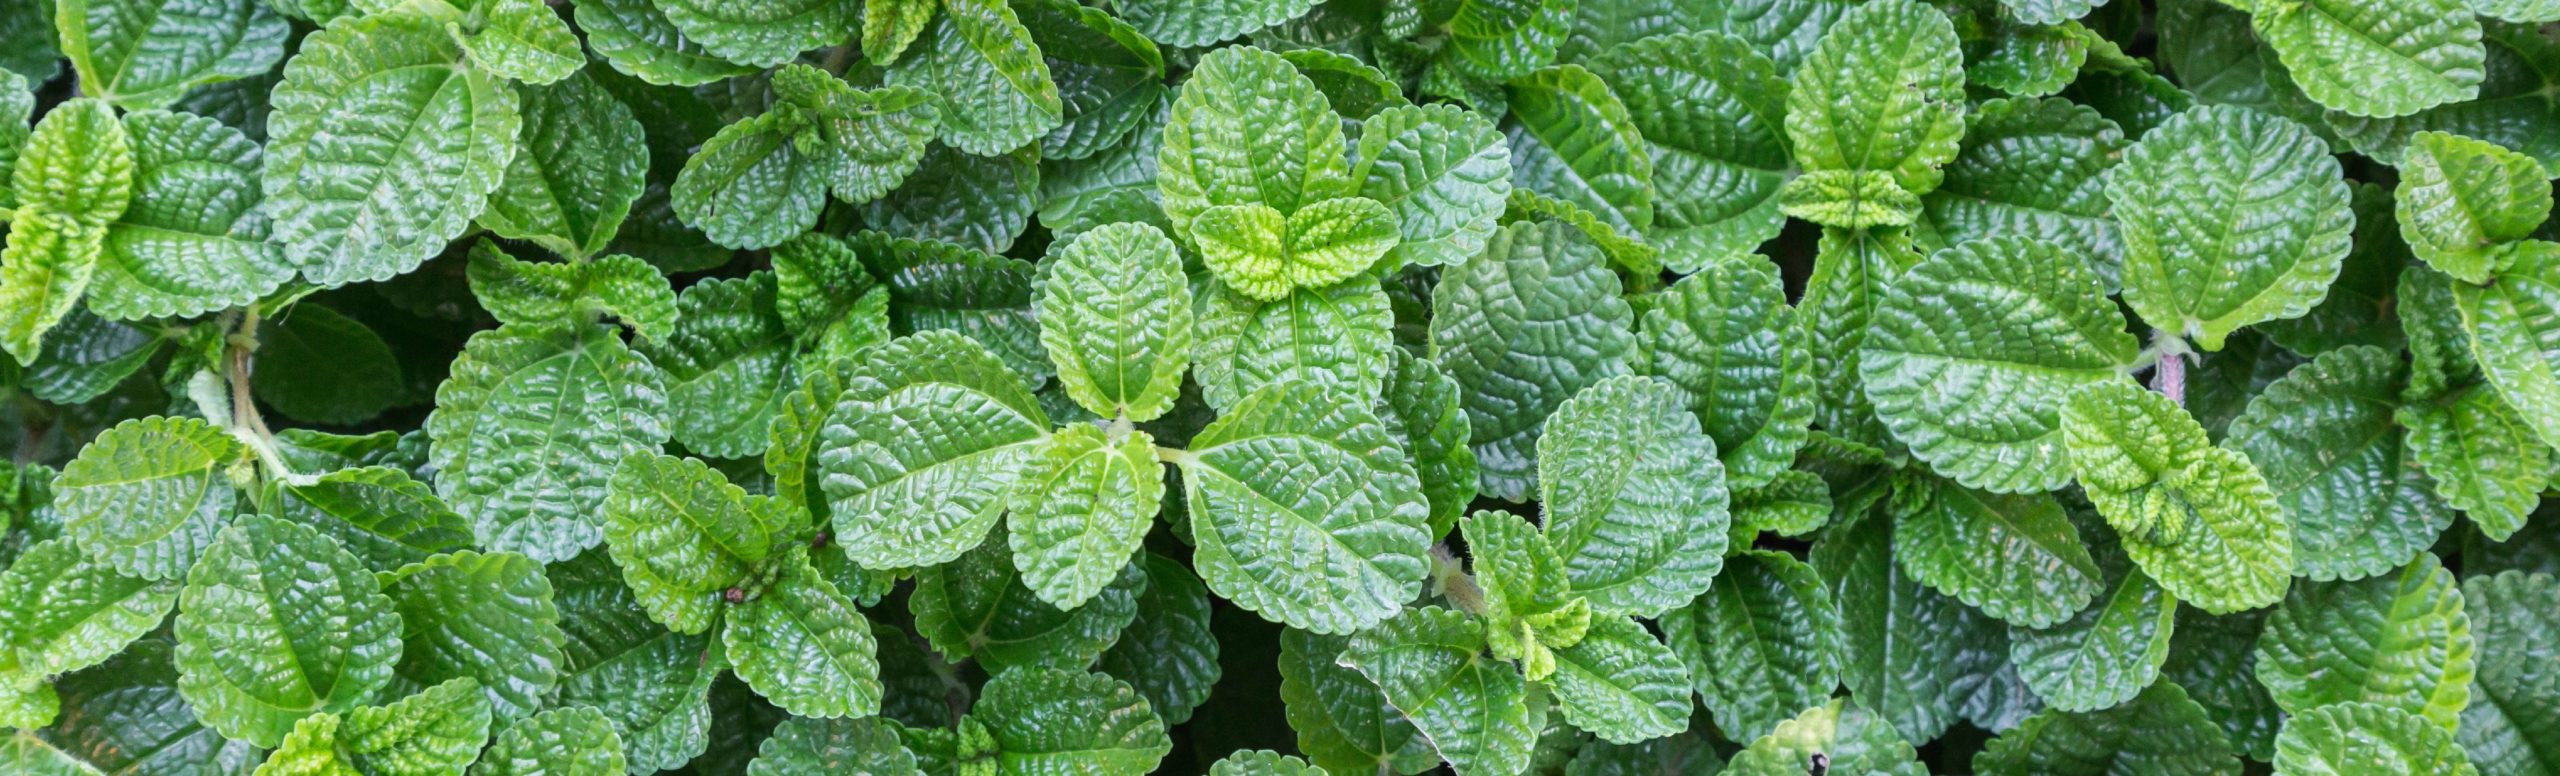 Hear Your Mind, Body and Spirit Spill Over with the Oohs and Ahs of Refreshing Peppermint